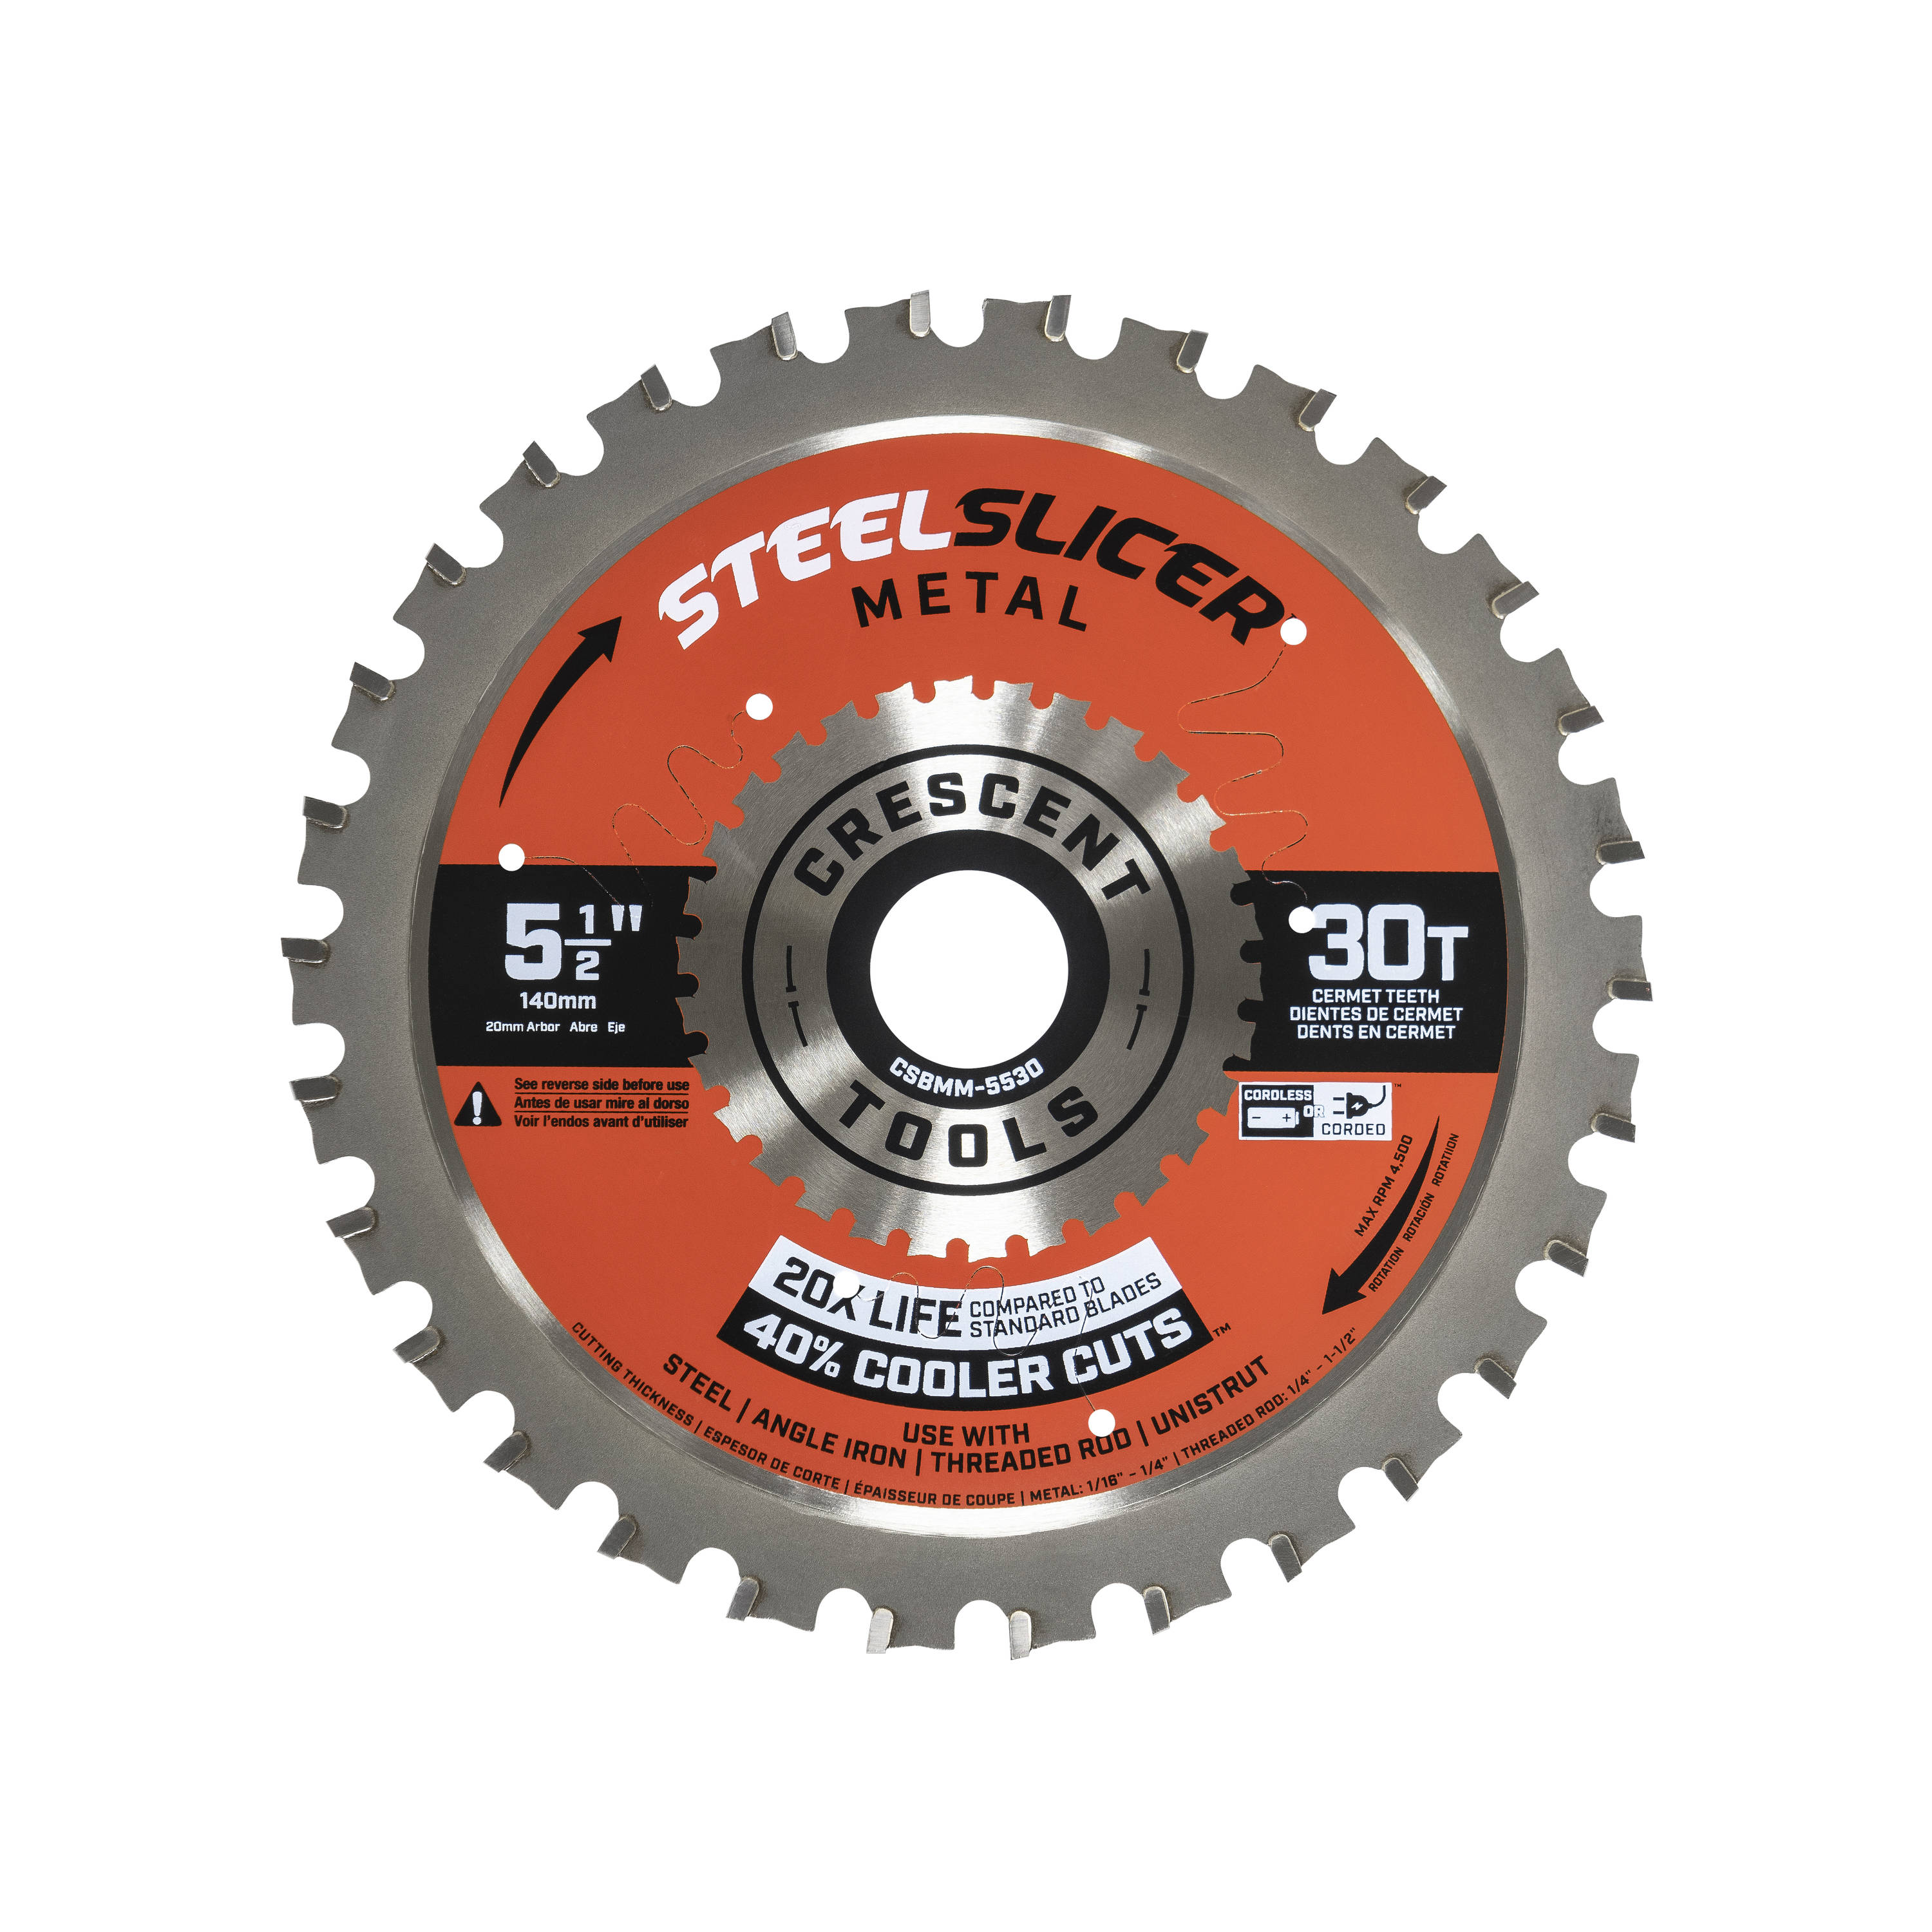 Are Table Saw Blades Reverse Threaded 